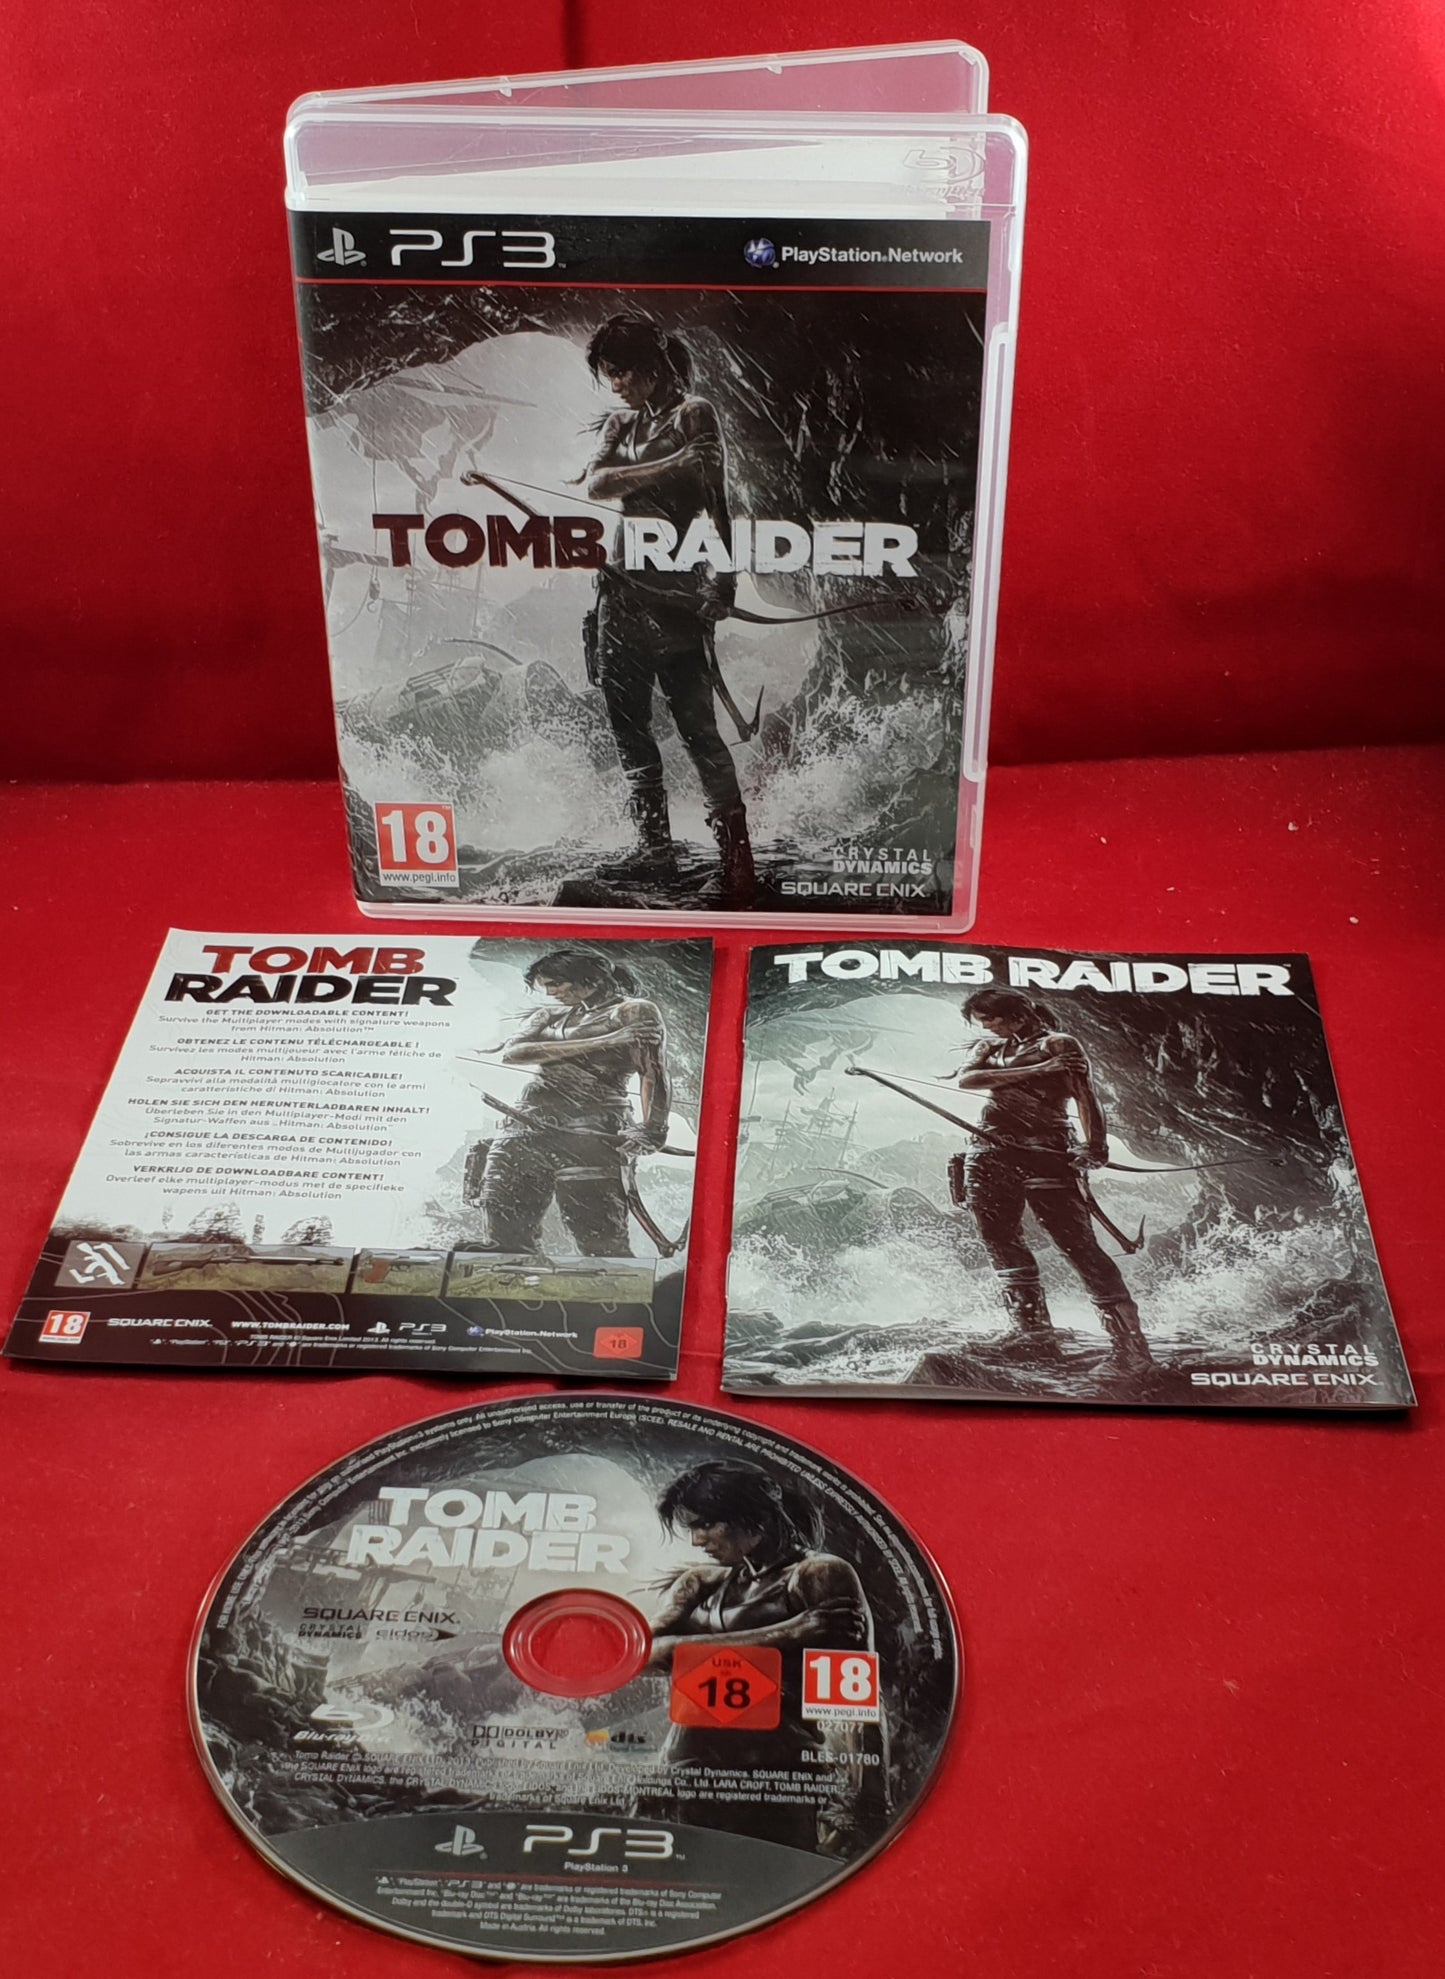 Tomb Raider Sony Playstation 3 (PS3) Game